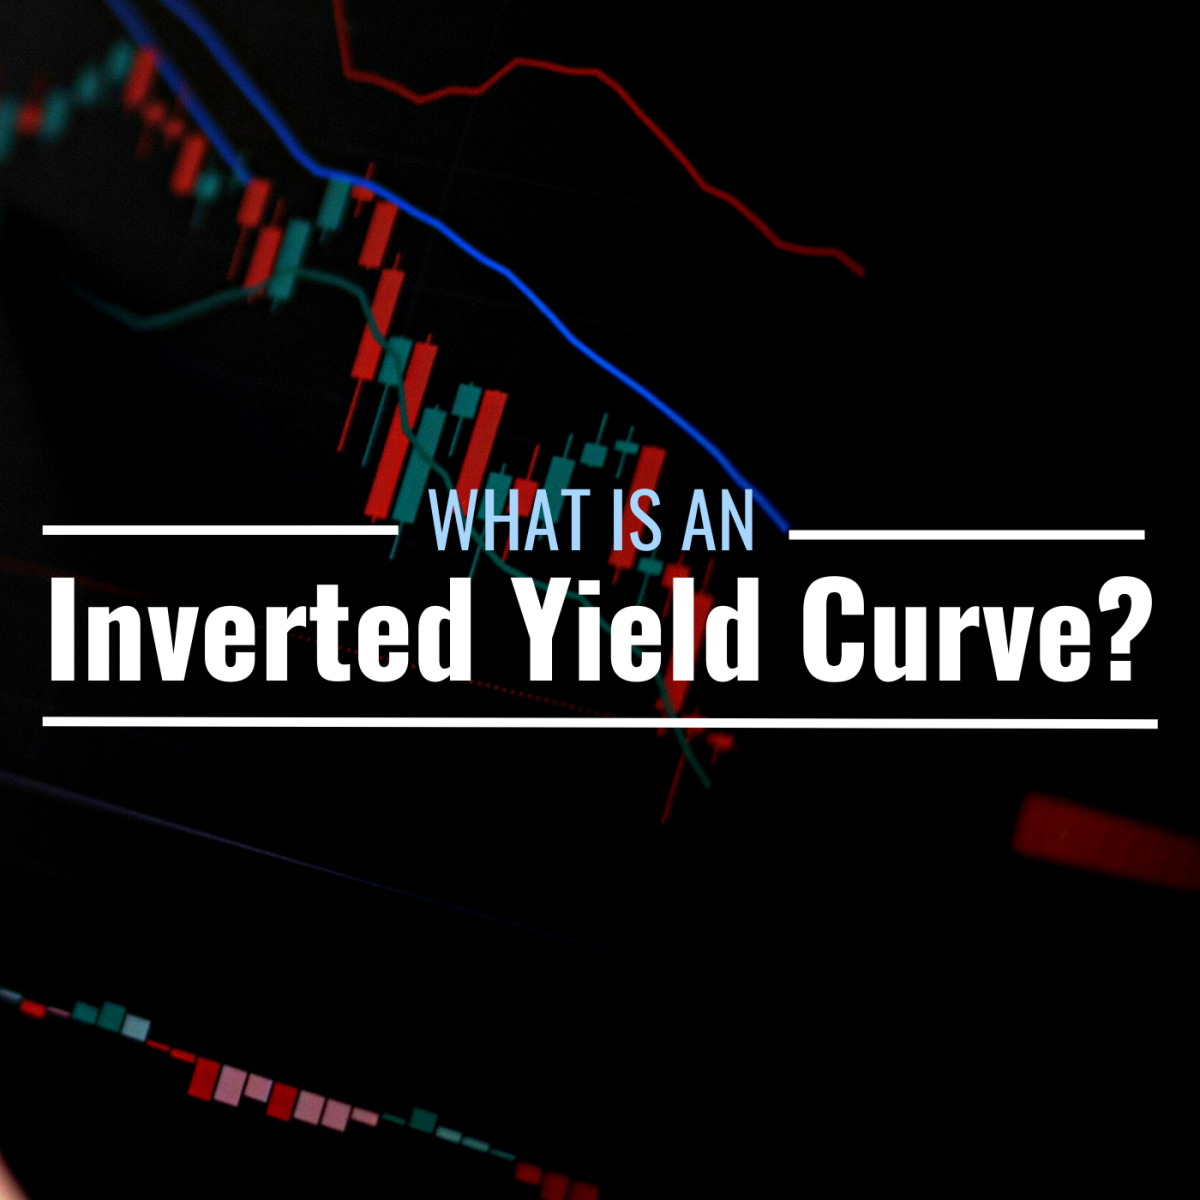 Photo of a price graphs with text overlay that reads "What Is an Inverted Yield Curve?"